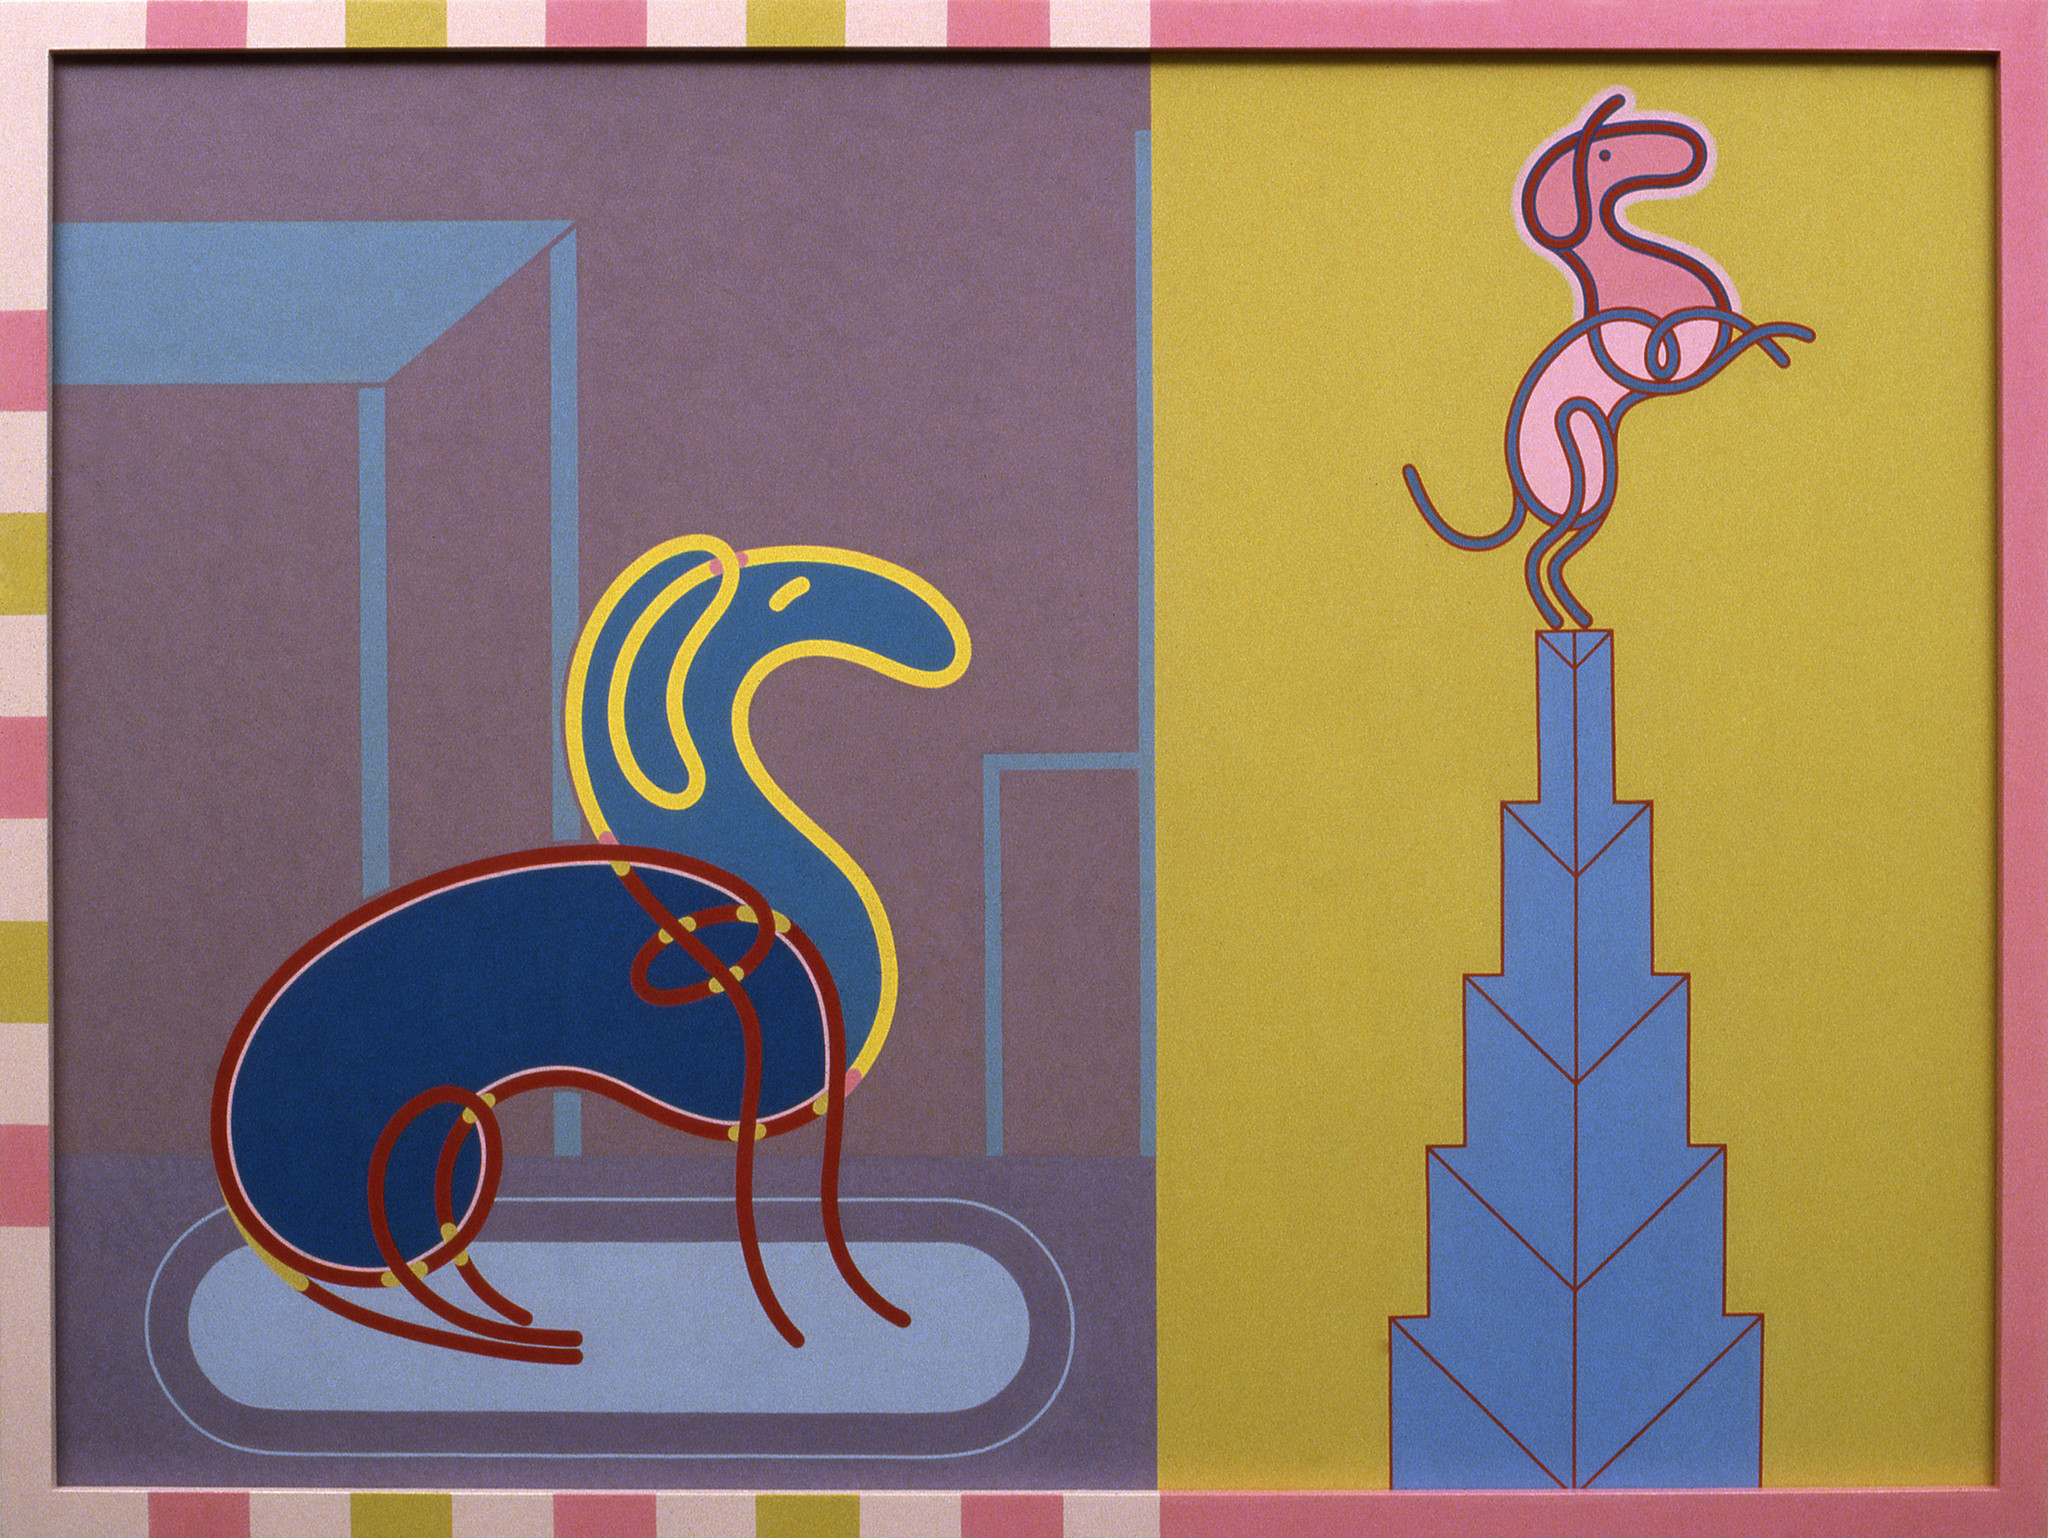 Barbara Rossi's “Dog Gone Heads or Tails (Dog-Matic),” 1982, acrylic on Masonite panel in artist’s frame, 36 inches by 48 inches by 2 inches